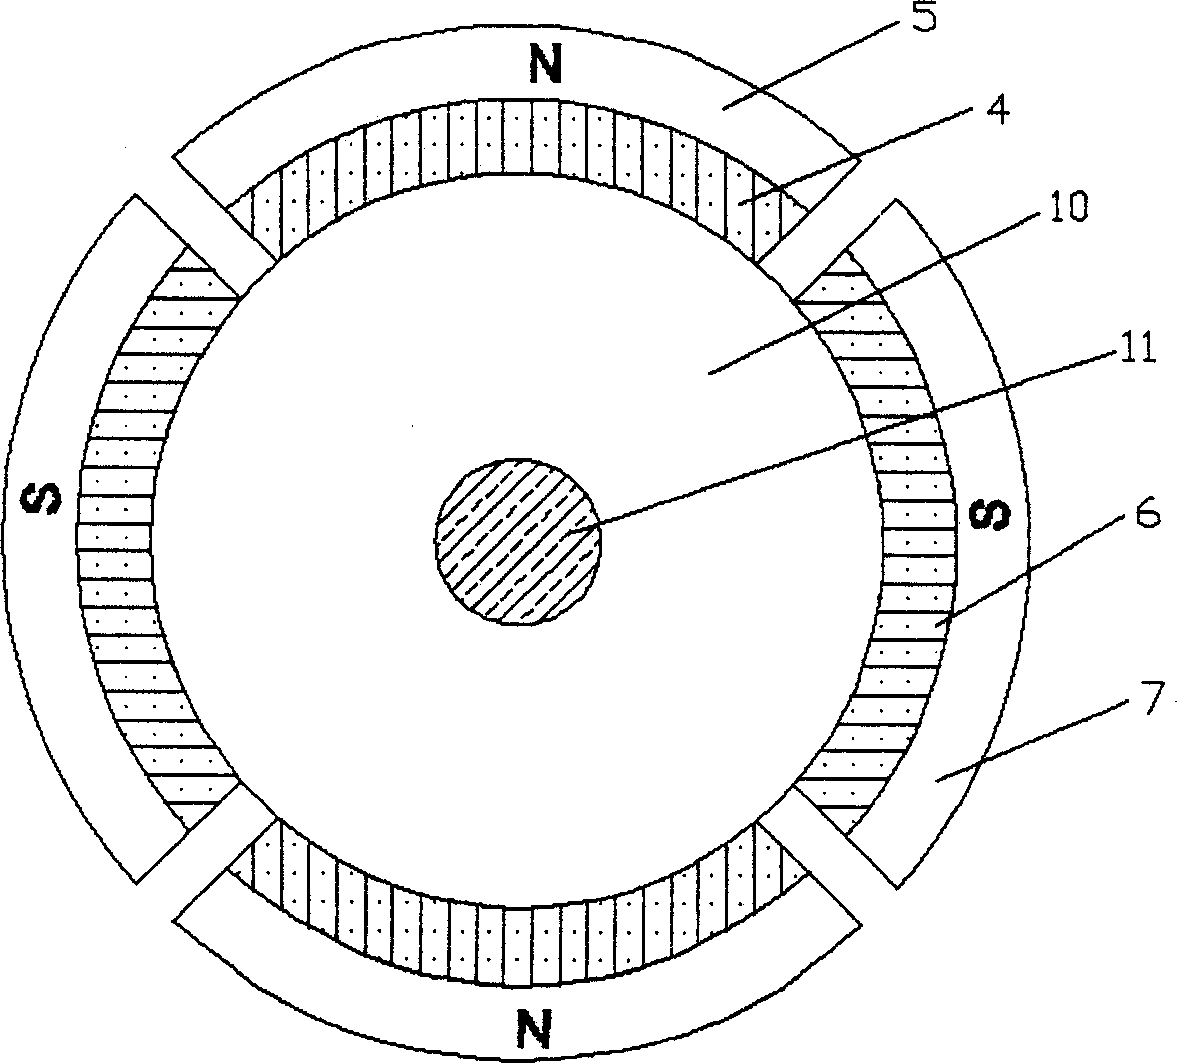 Mixed excitation synchronous motor with radial structure